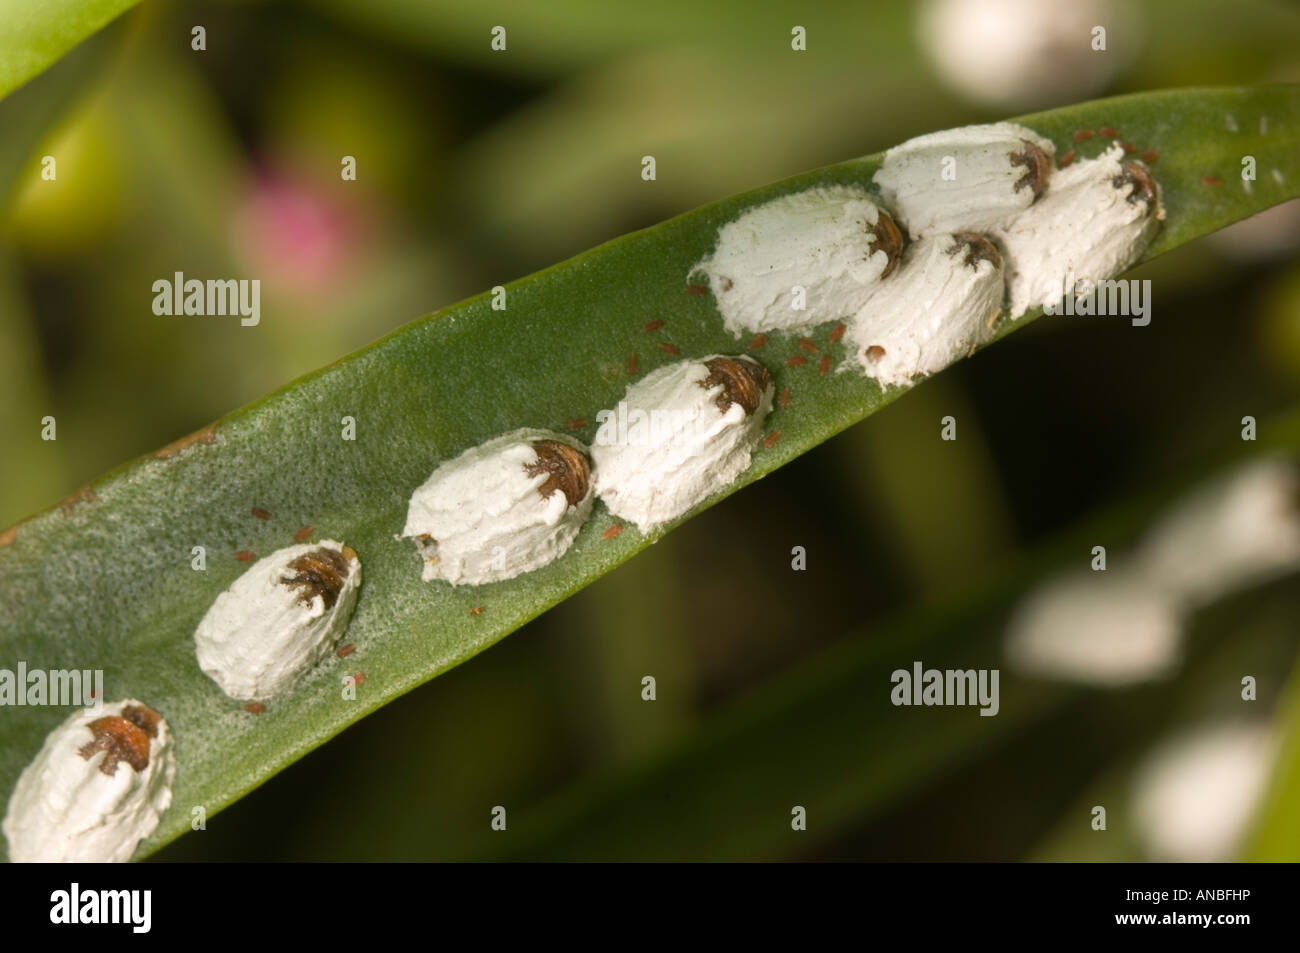 Scale insects on Australian native myrtle Stock Photo